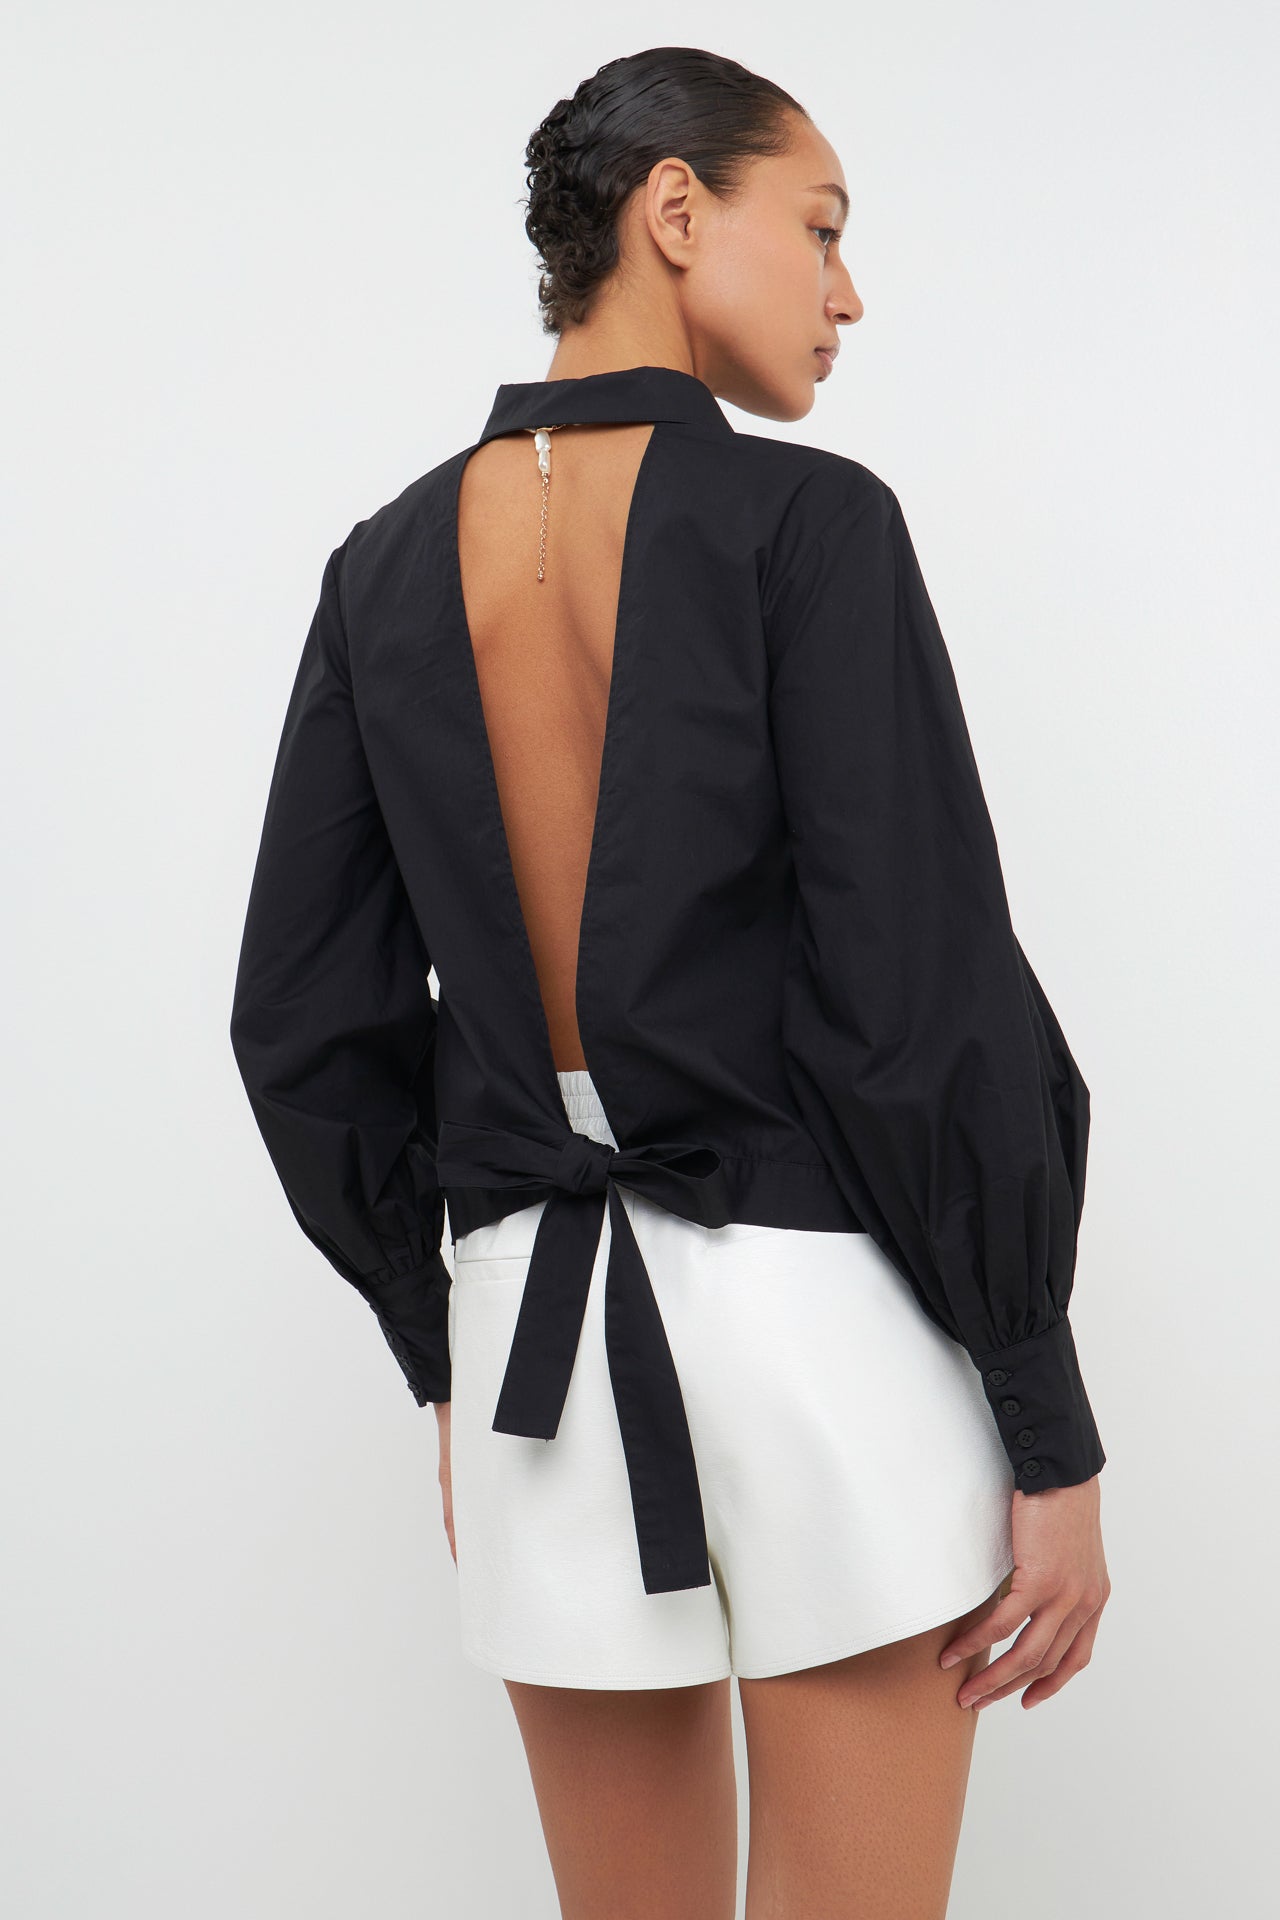 GREY LAB-Backless Long Sleeve Shirt-SHIRTS & BLOUSES available at Objectrare